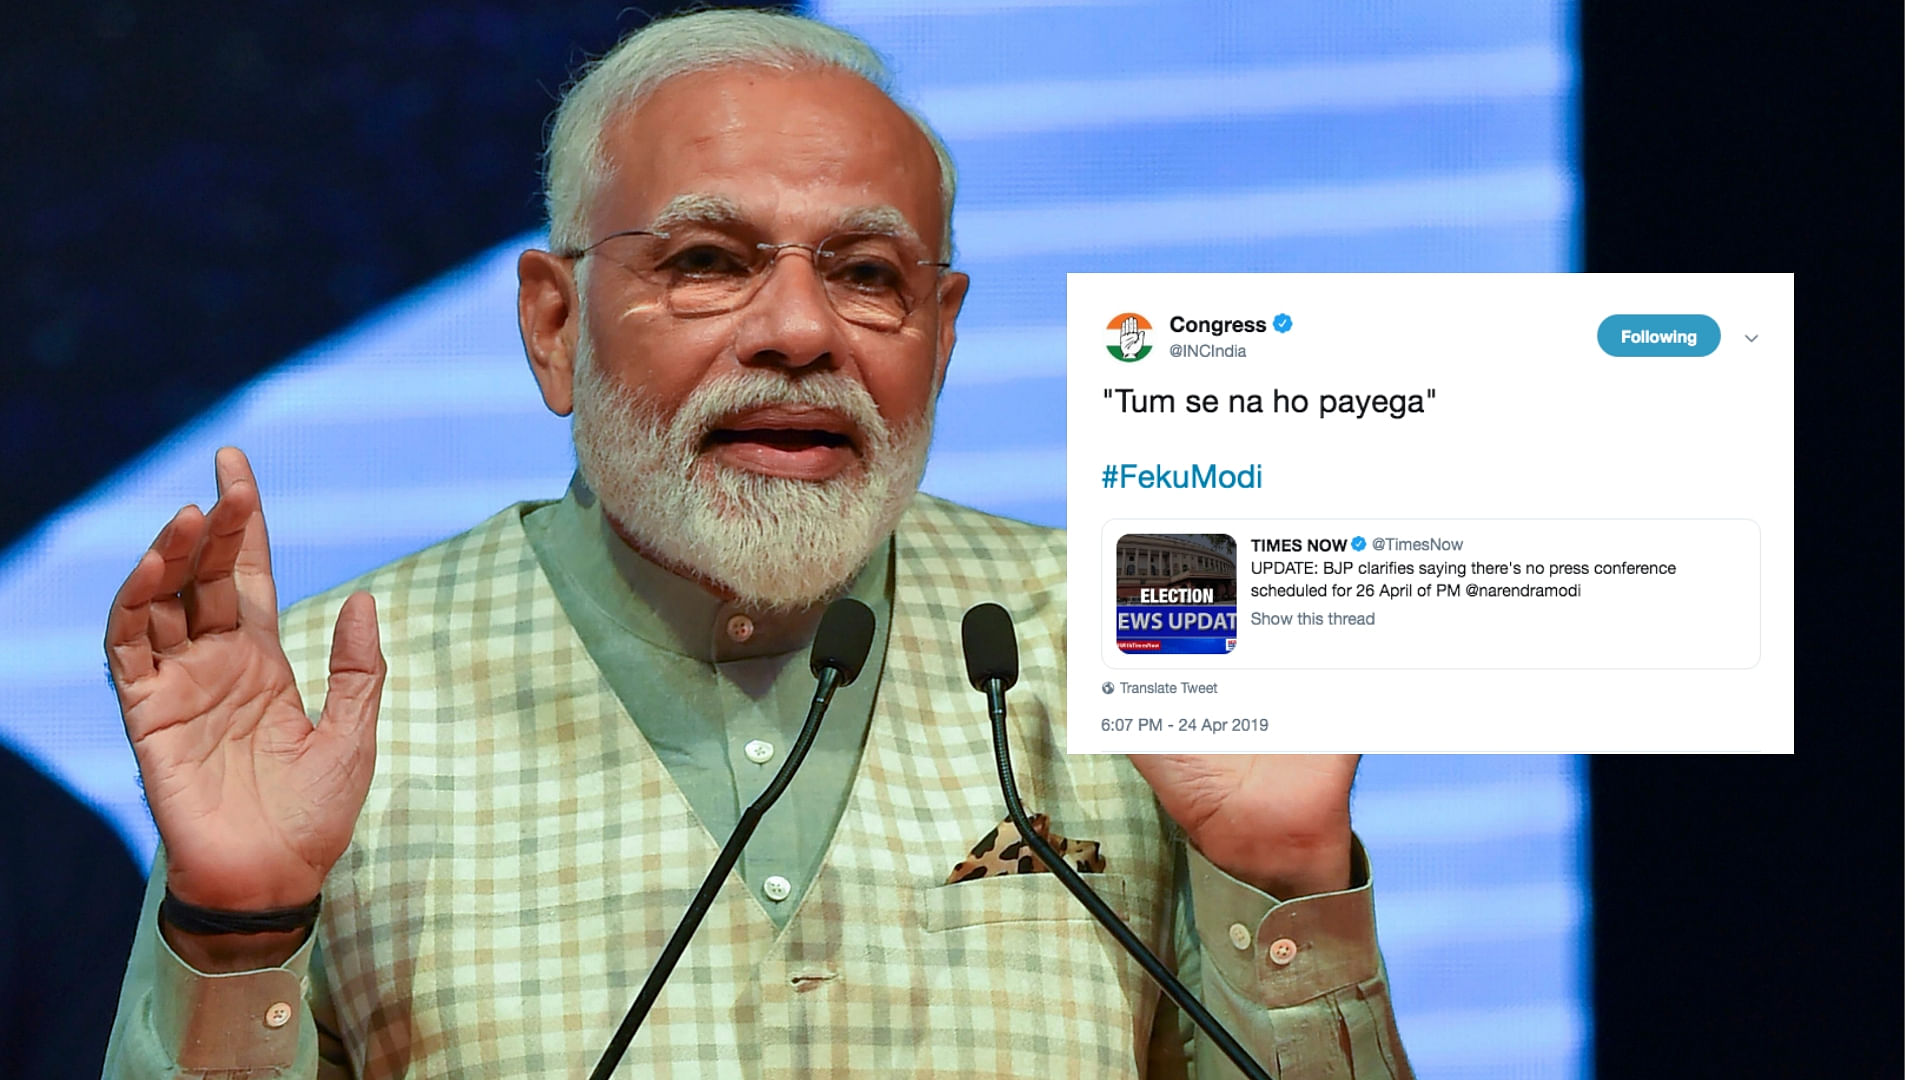 Times Now on Wednesday announced that PM Modi would be holding a press conference. However, it later retracted.